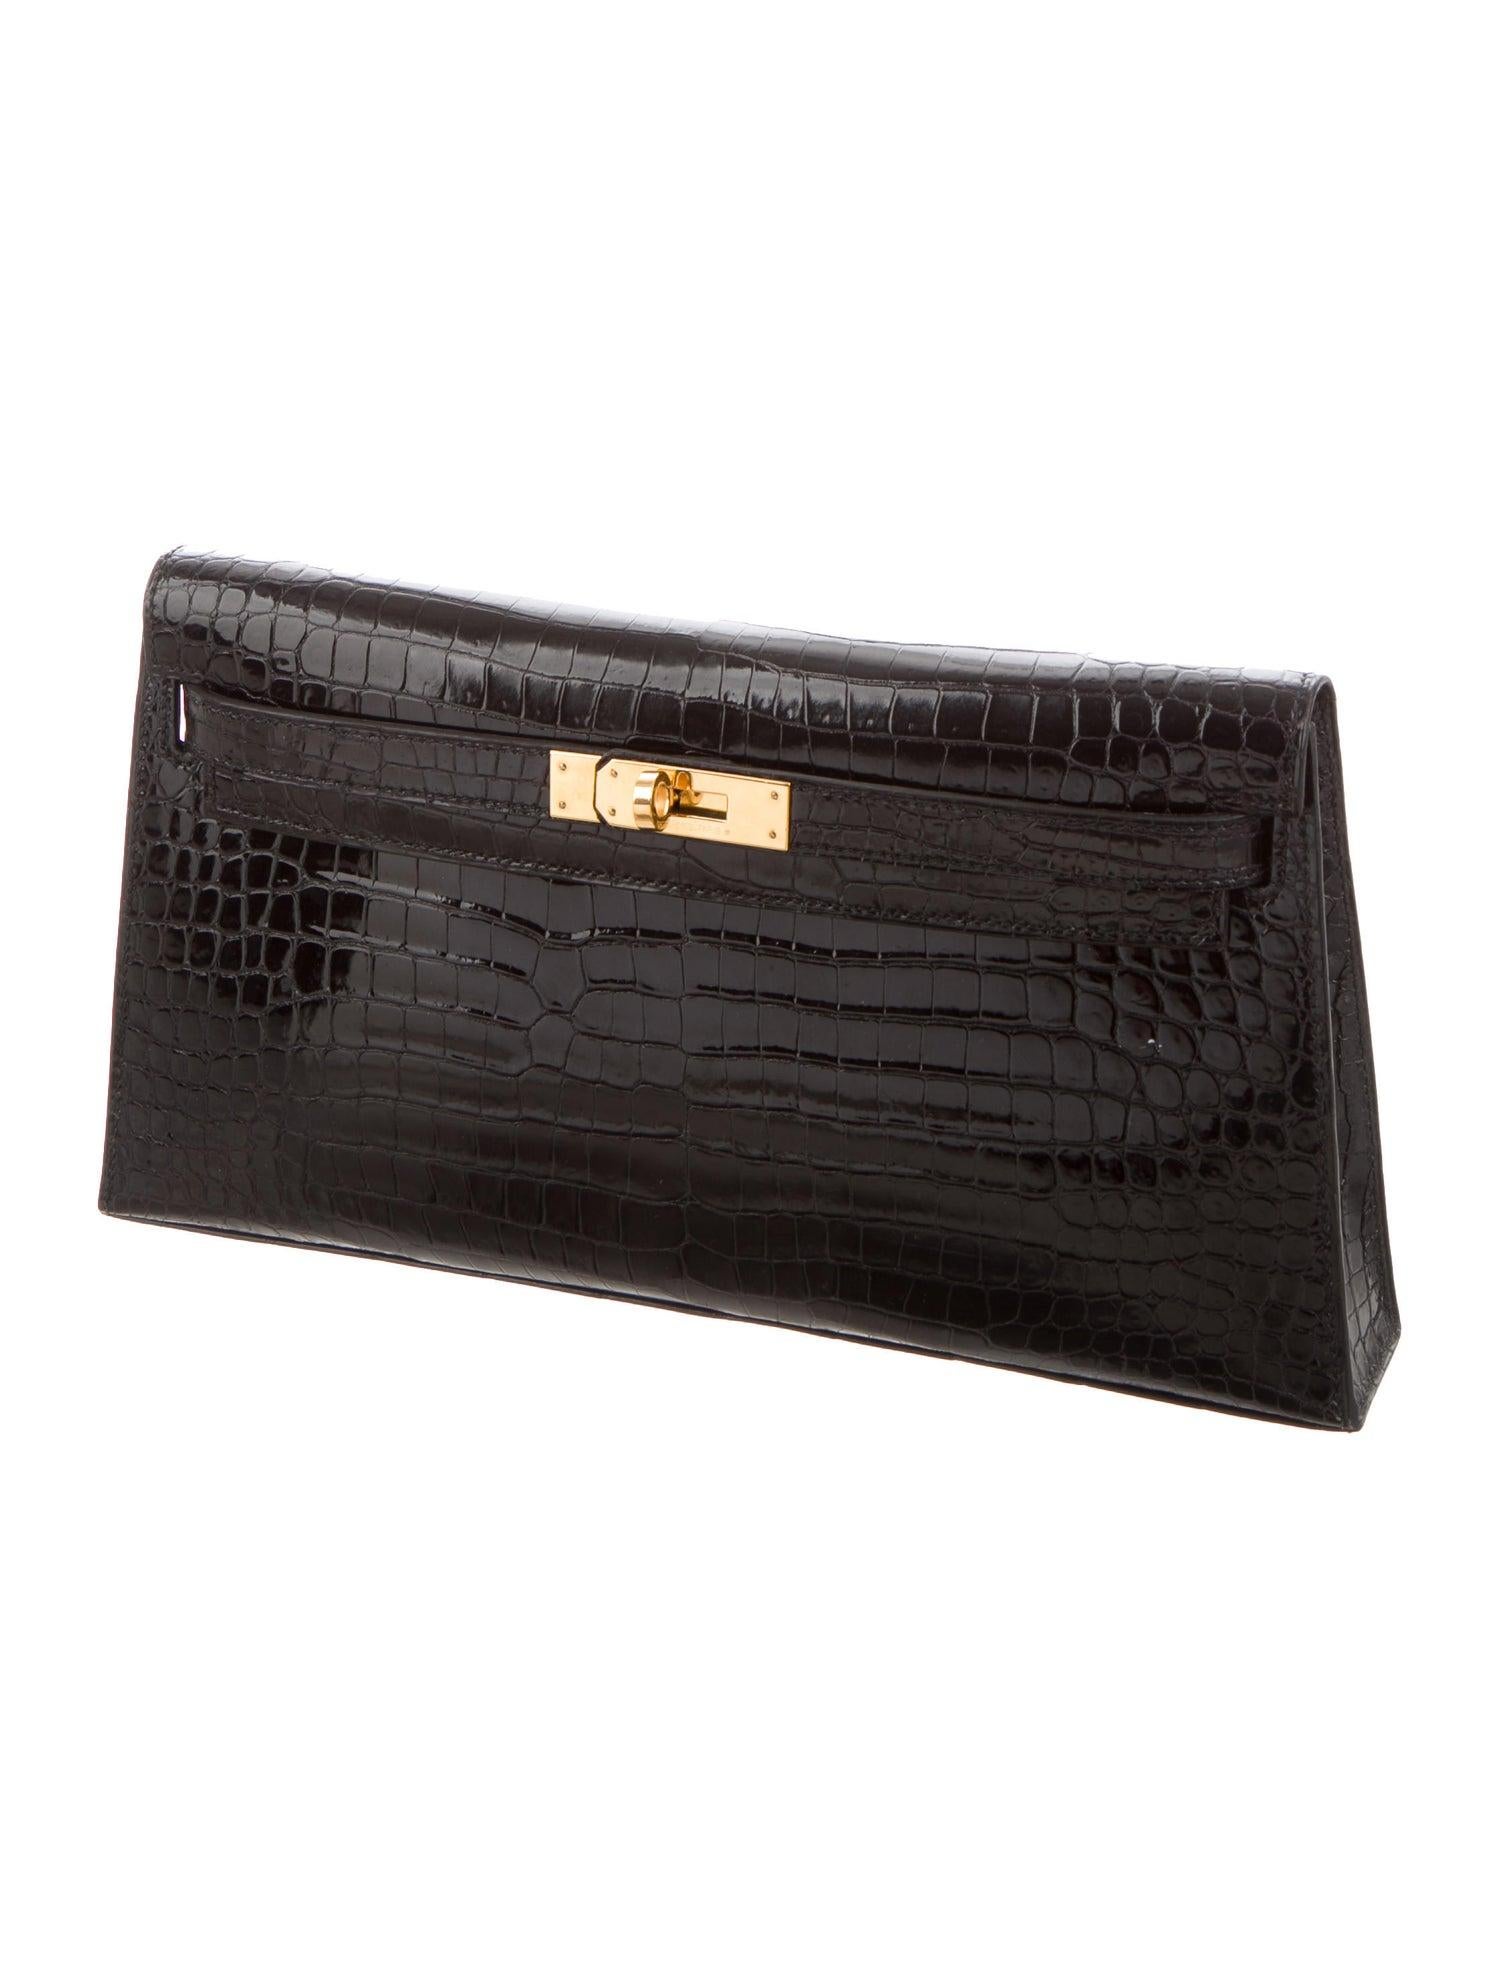 Hermes Black Crocodile Leather Gold Top Handle Satchel Kelly Evening Clutch Flap Bag

Crocodile
Gold-plated hardware
Leather lining
Turn-lock closure
Measures 10